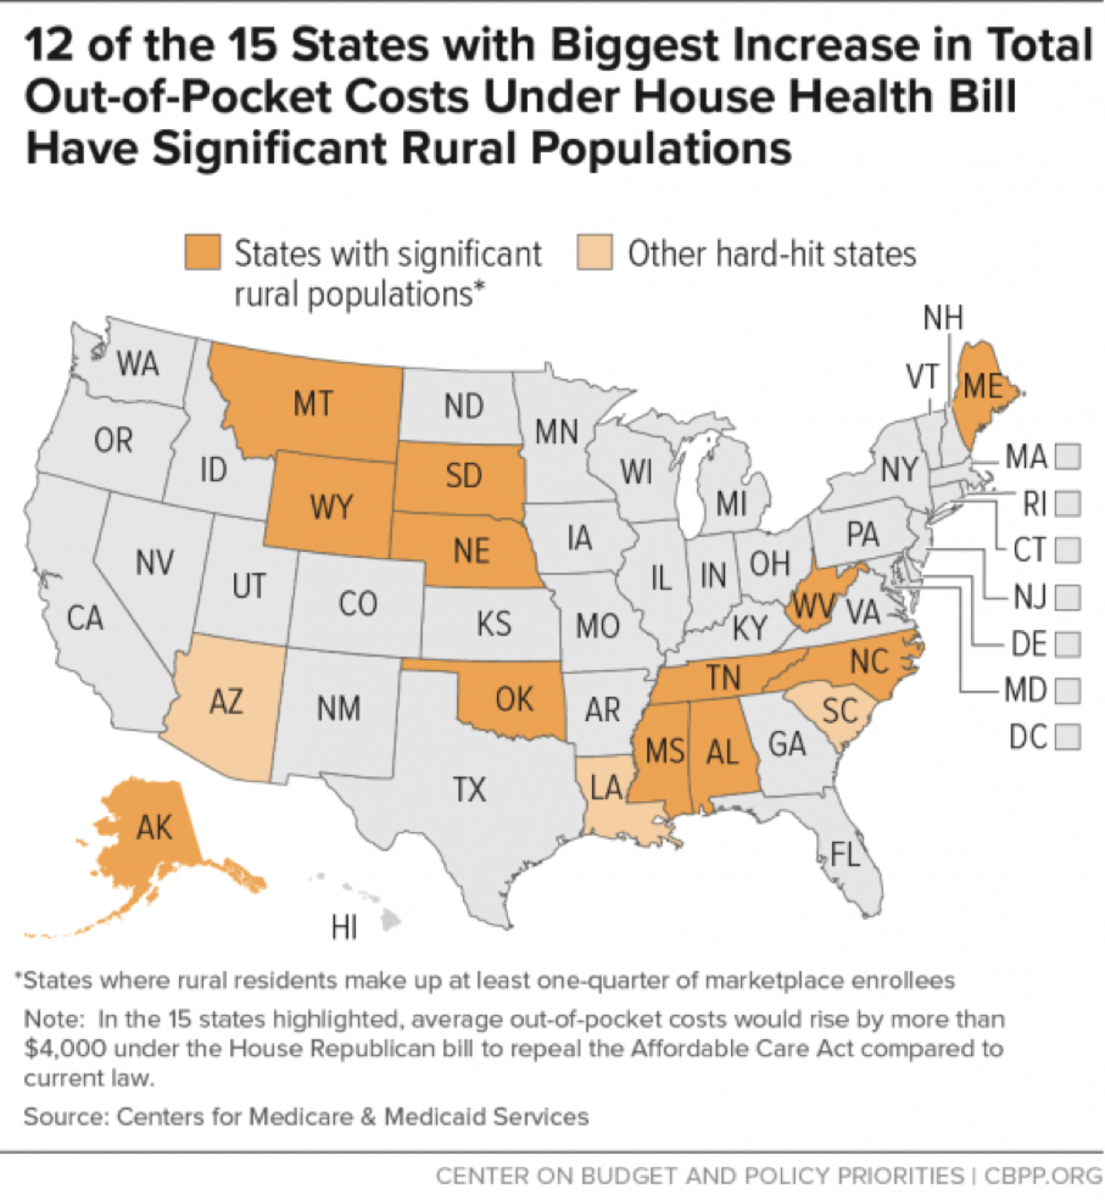 Out-of-pocket costs under AHCA